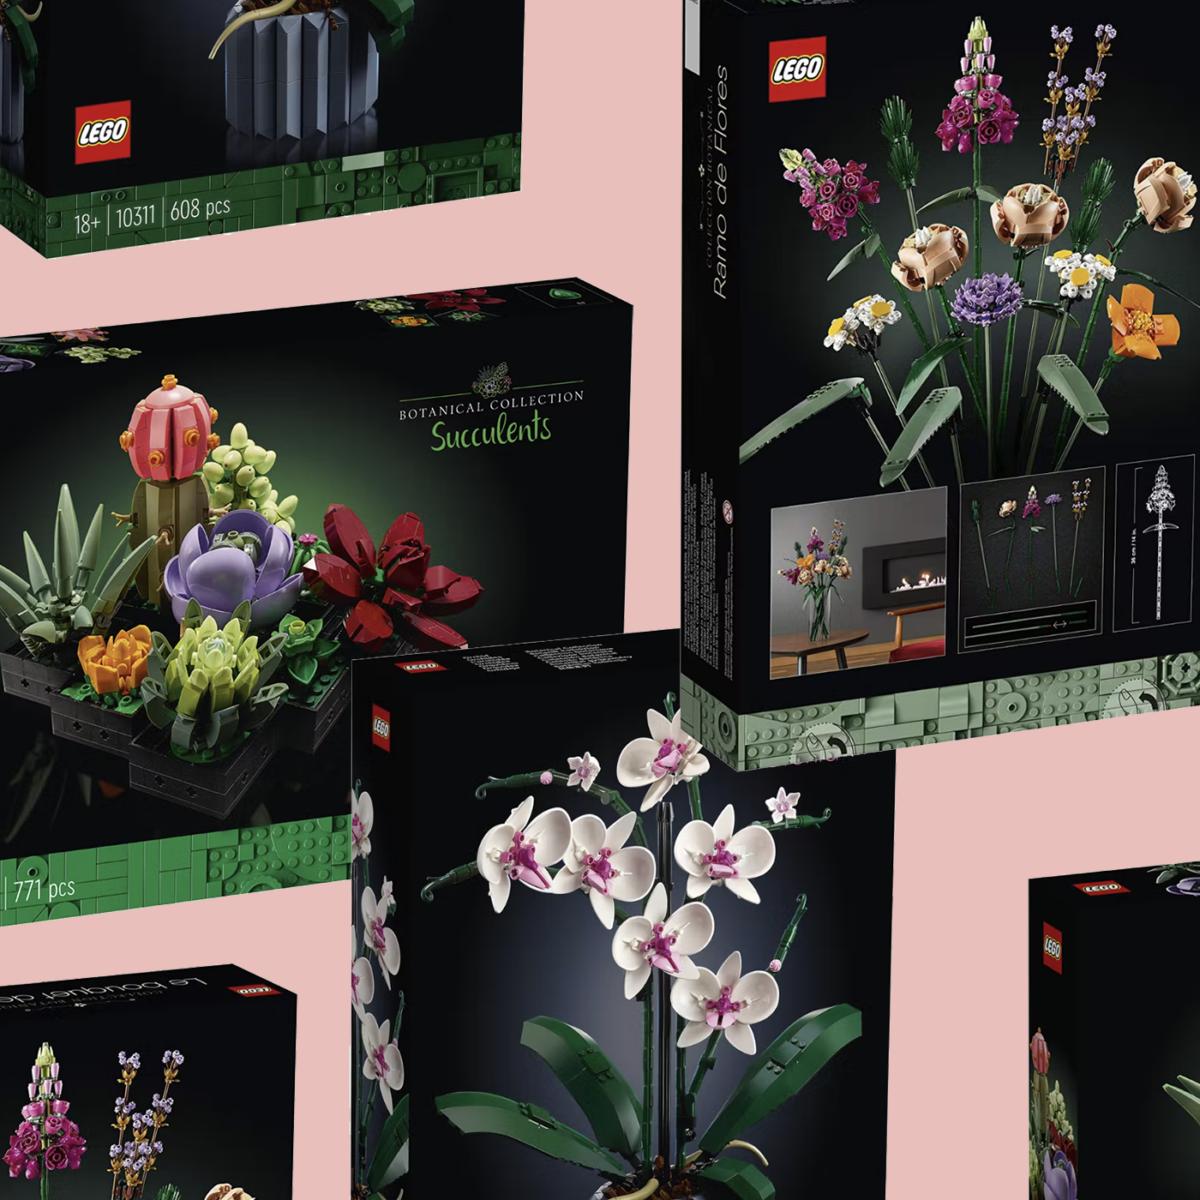 The LEGO Botanical Collection